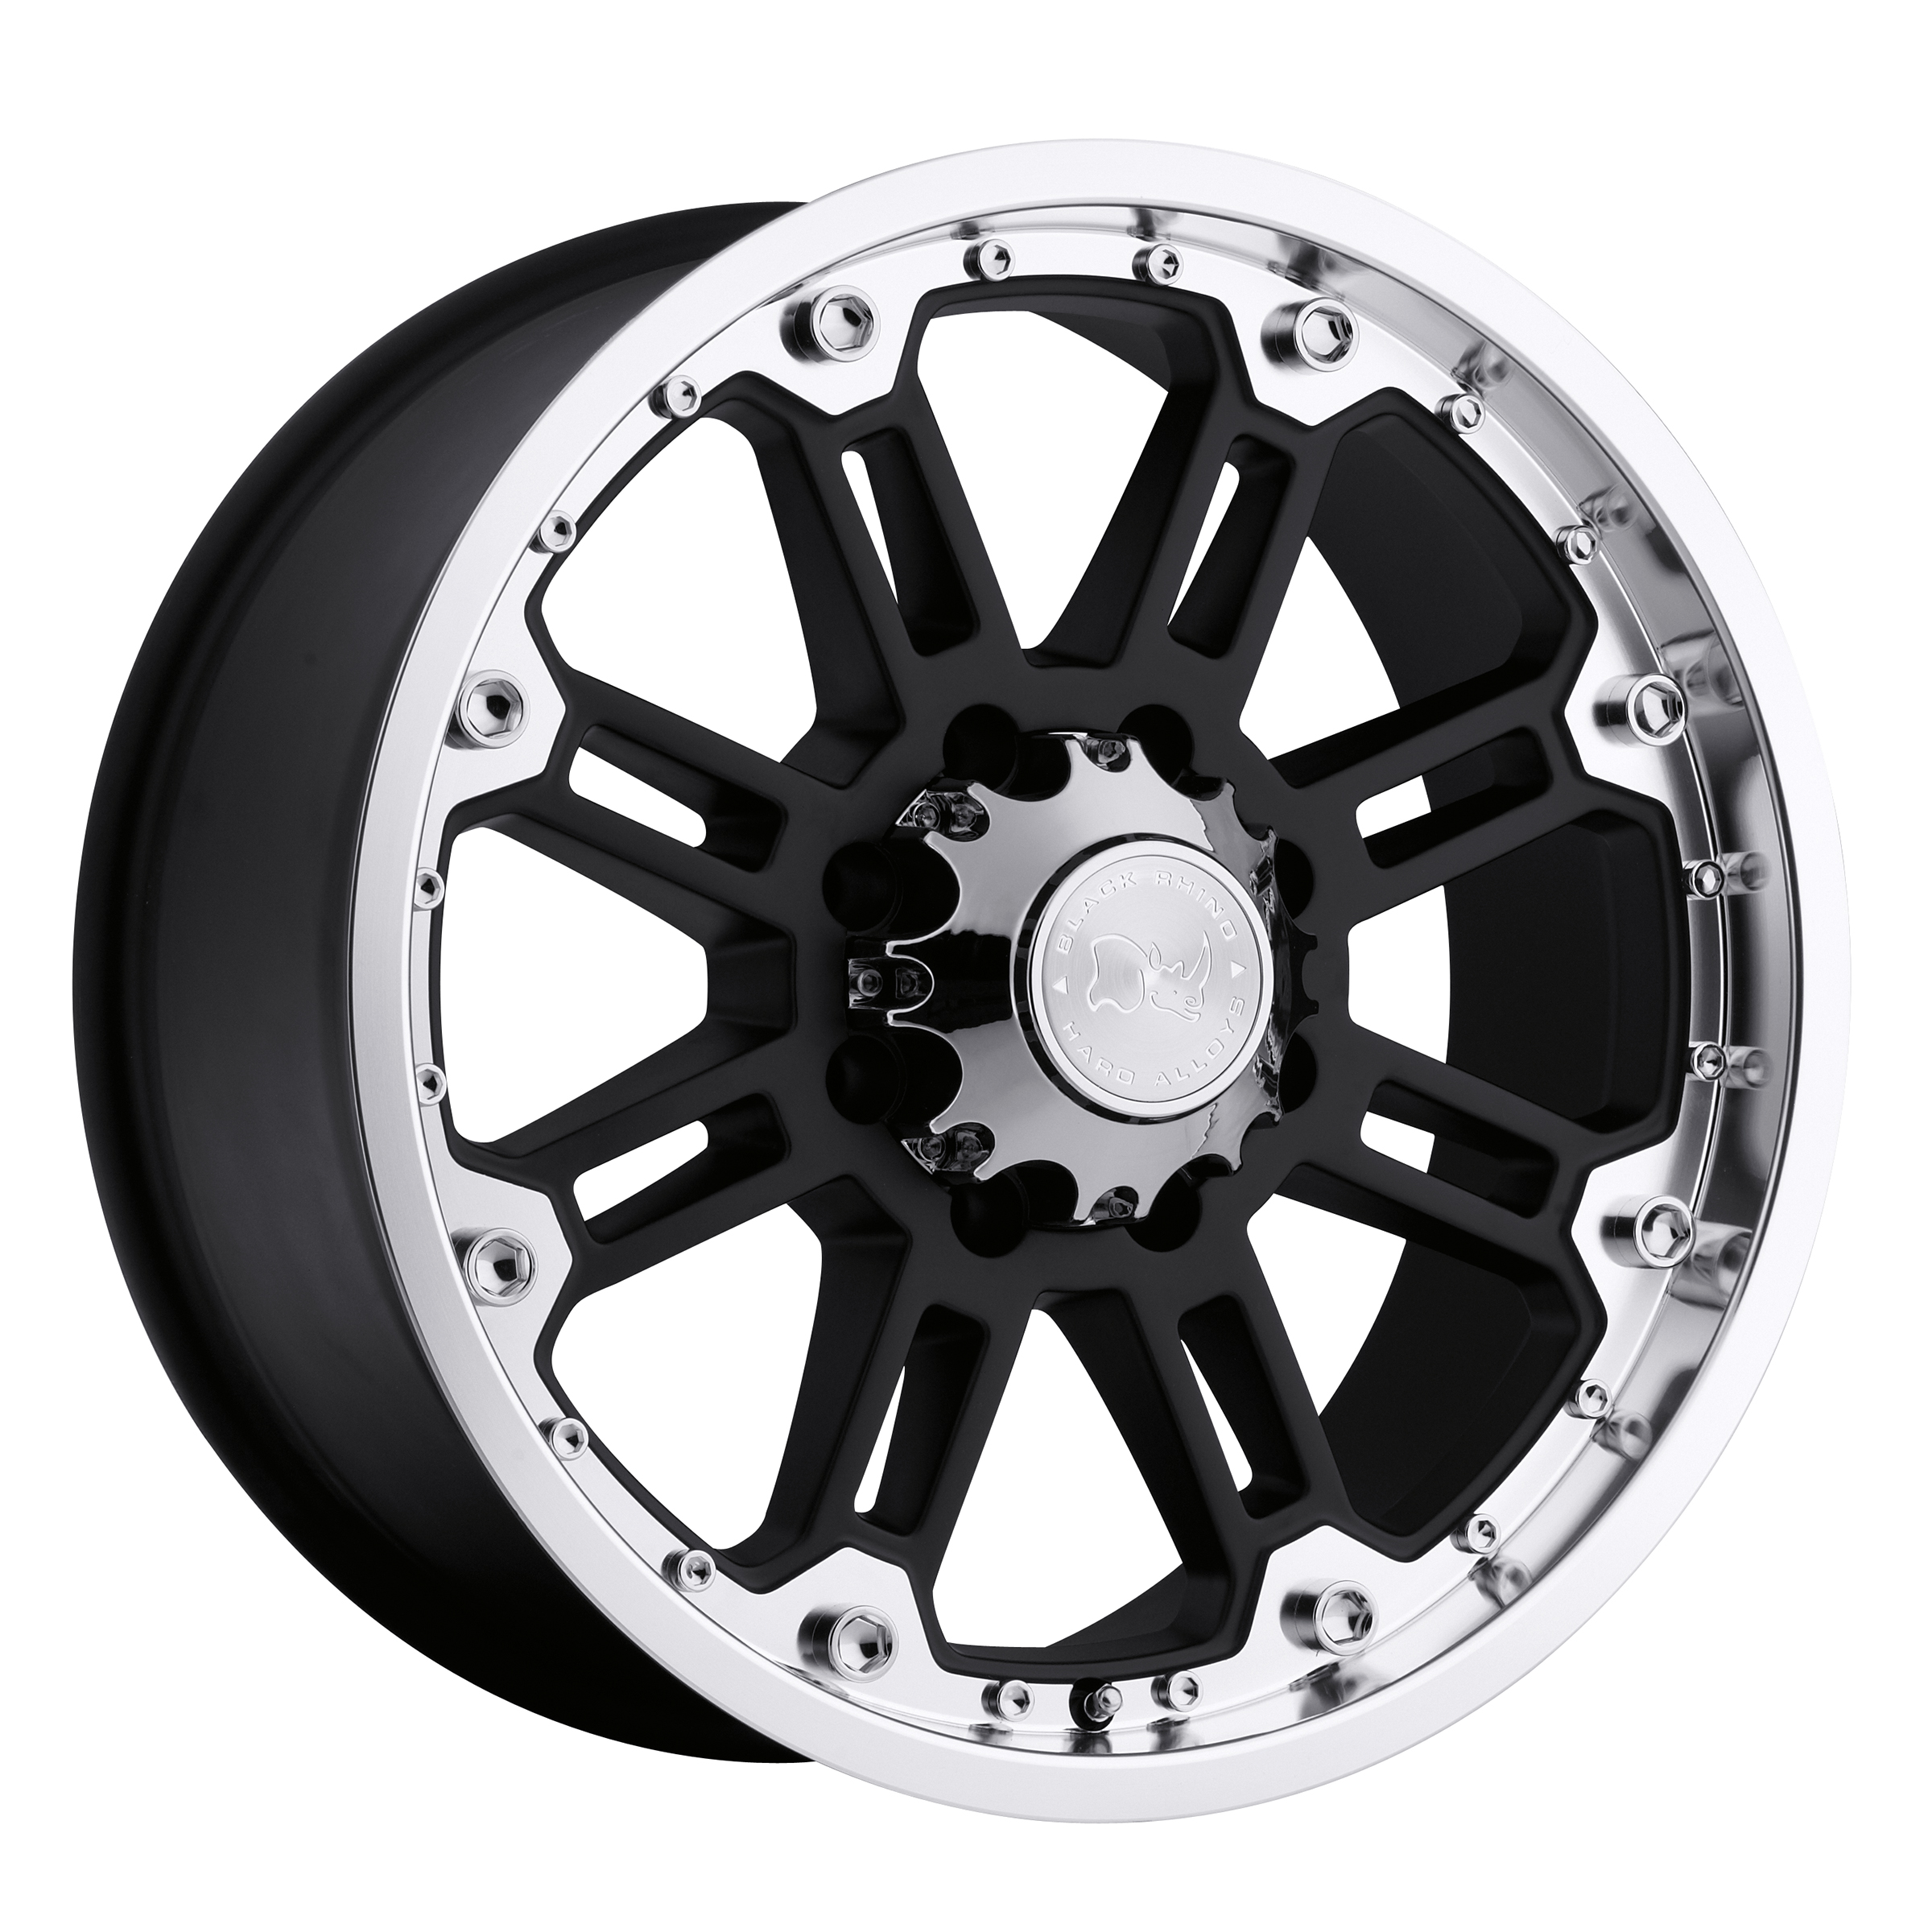 Black Rhino Wheels To Introduce Three New Truck And Offroad Wheels At